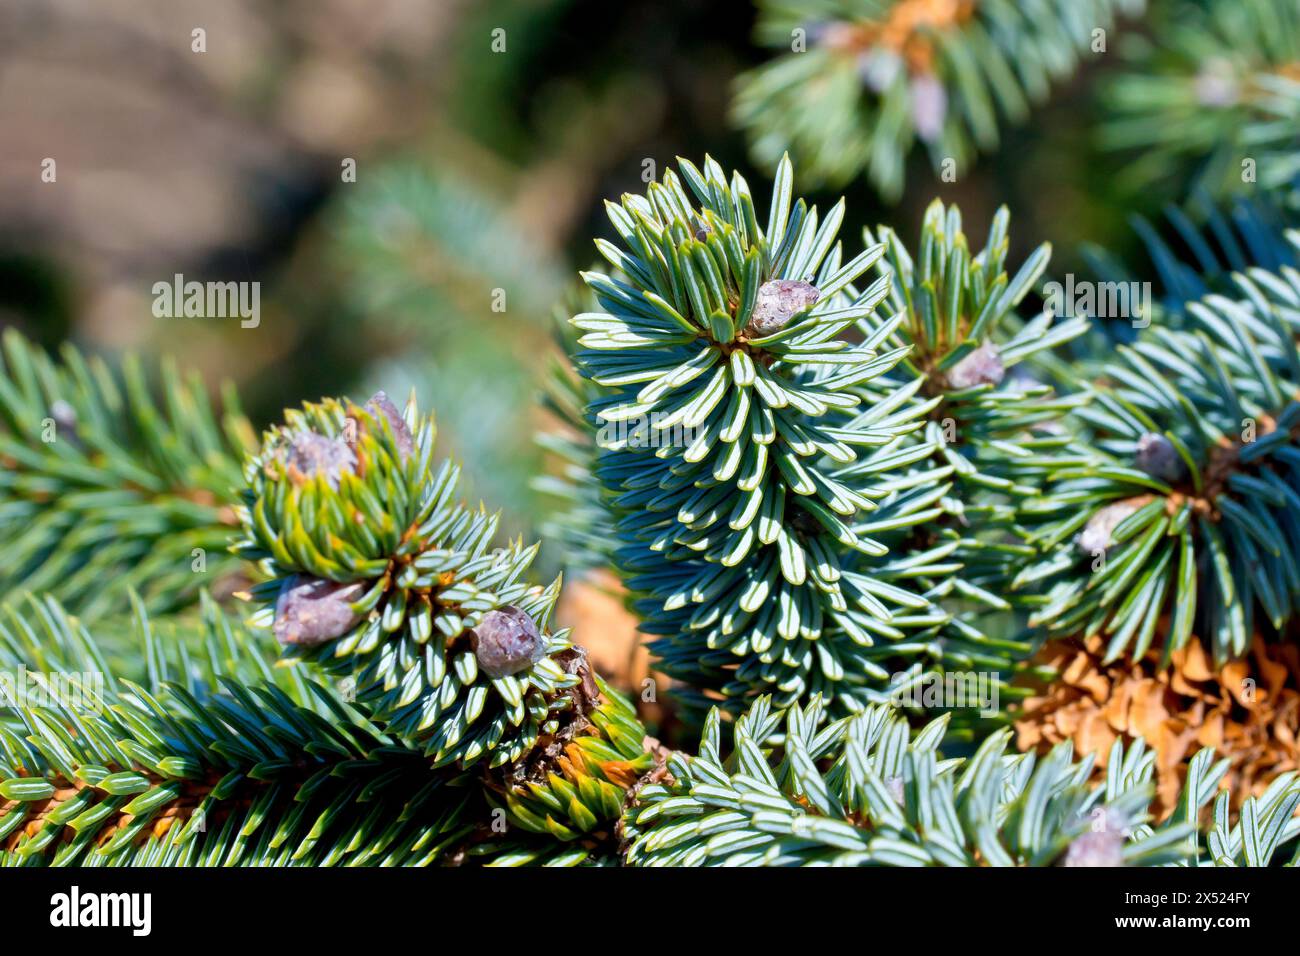 Sitka Spruce (picea sitchensis), close up of young leaves or needles of the tree, showing the coating that gives them their distinctive bluish look. Stock Photo